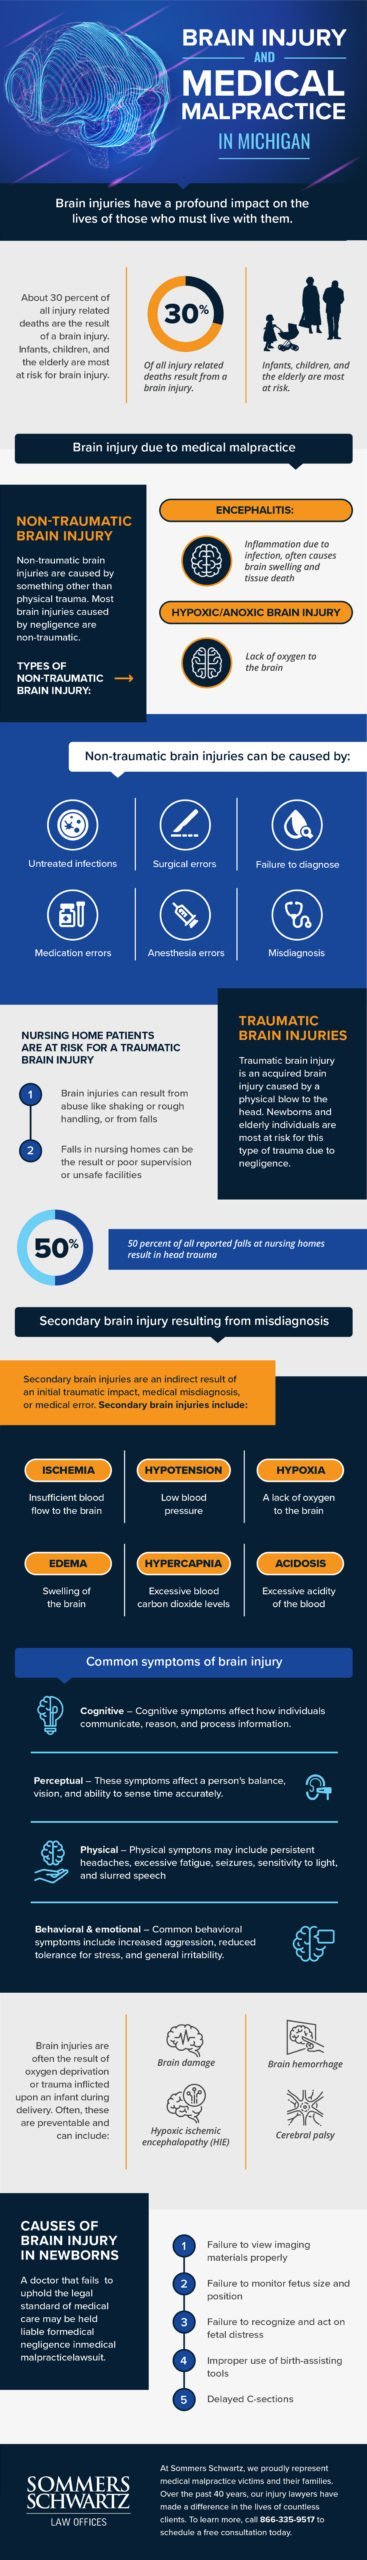 Sommers IF Brain Injury v2 scaled